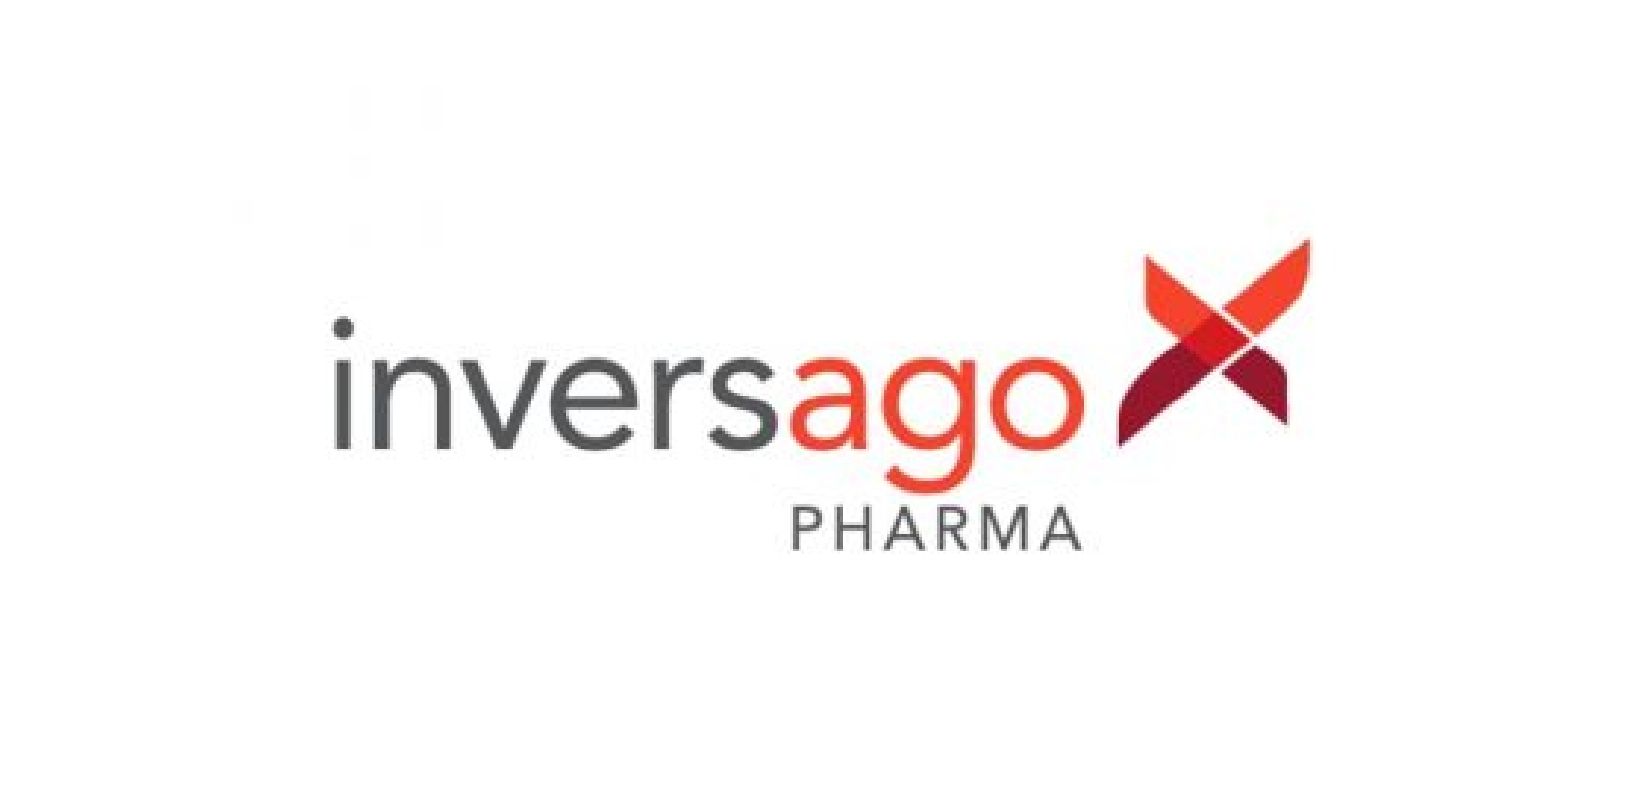 adMare is pleased to increase our investment in Inversago Pharma alongside leading life sciences investors and be a part of building this exceptional Canadian company developing innovative therapies